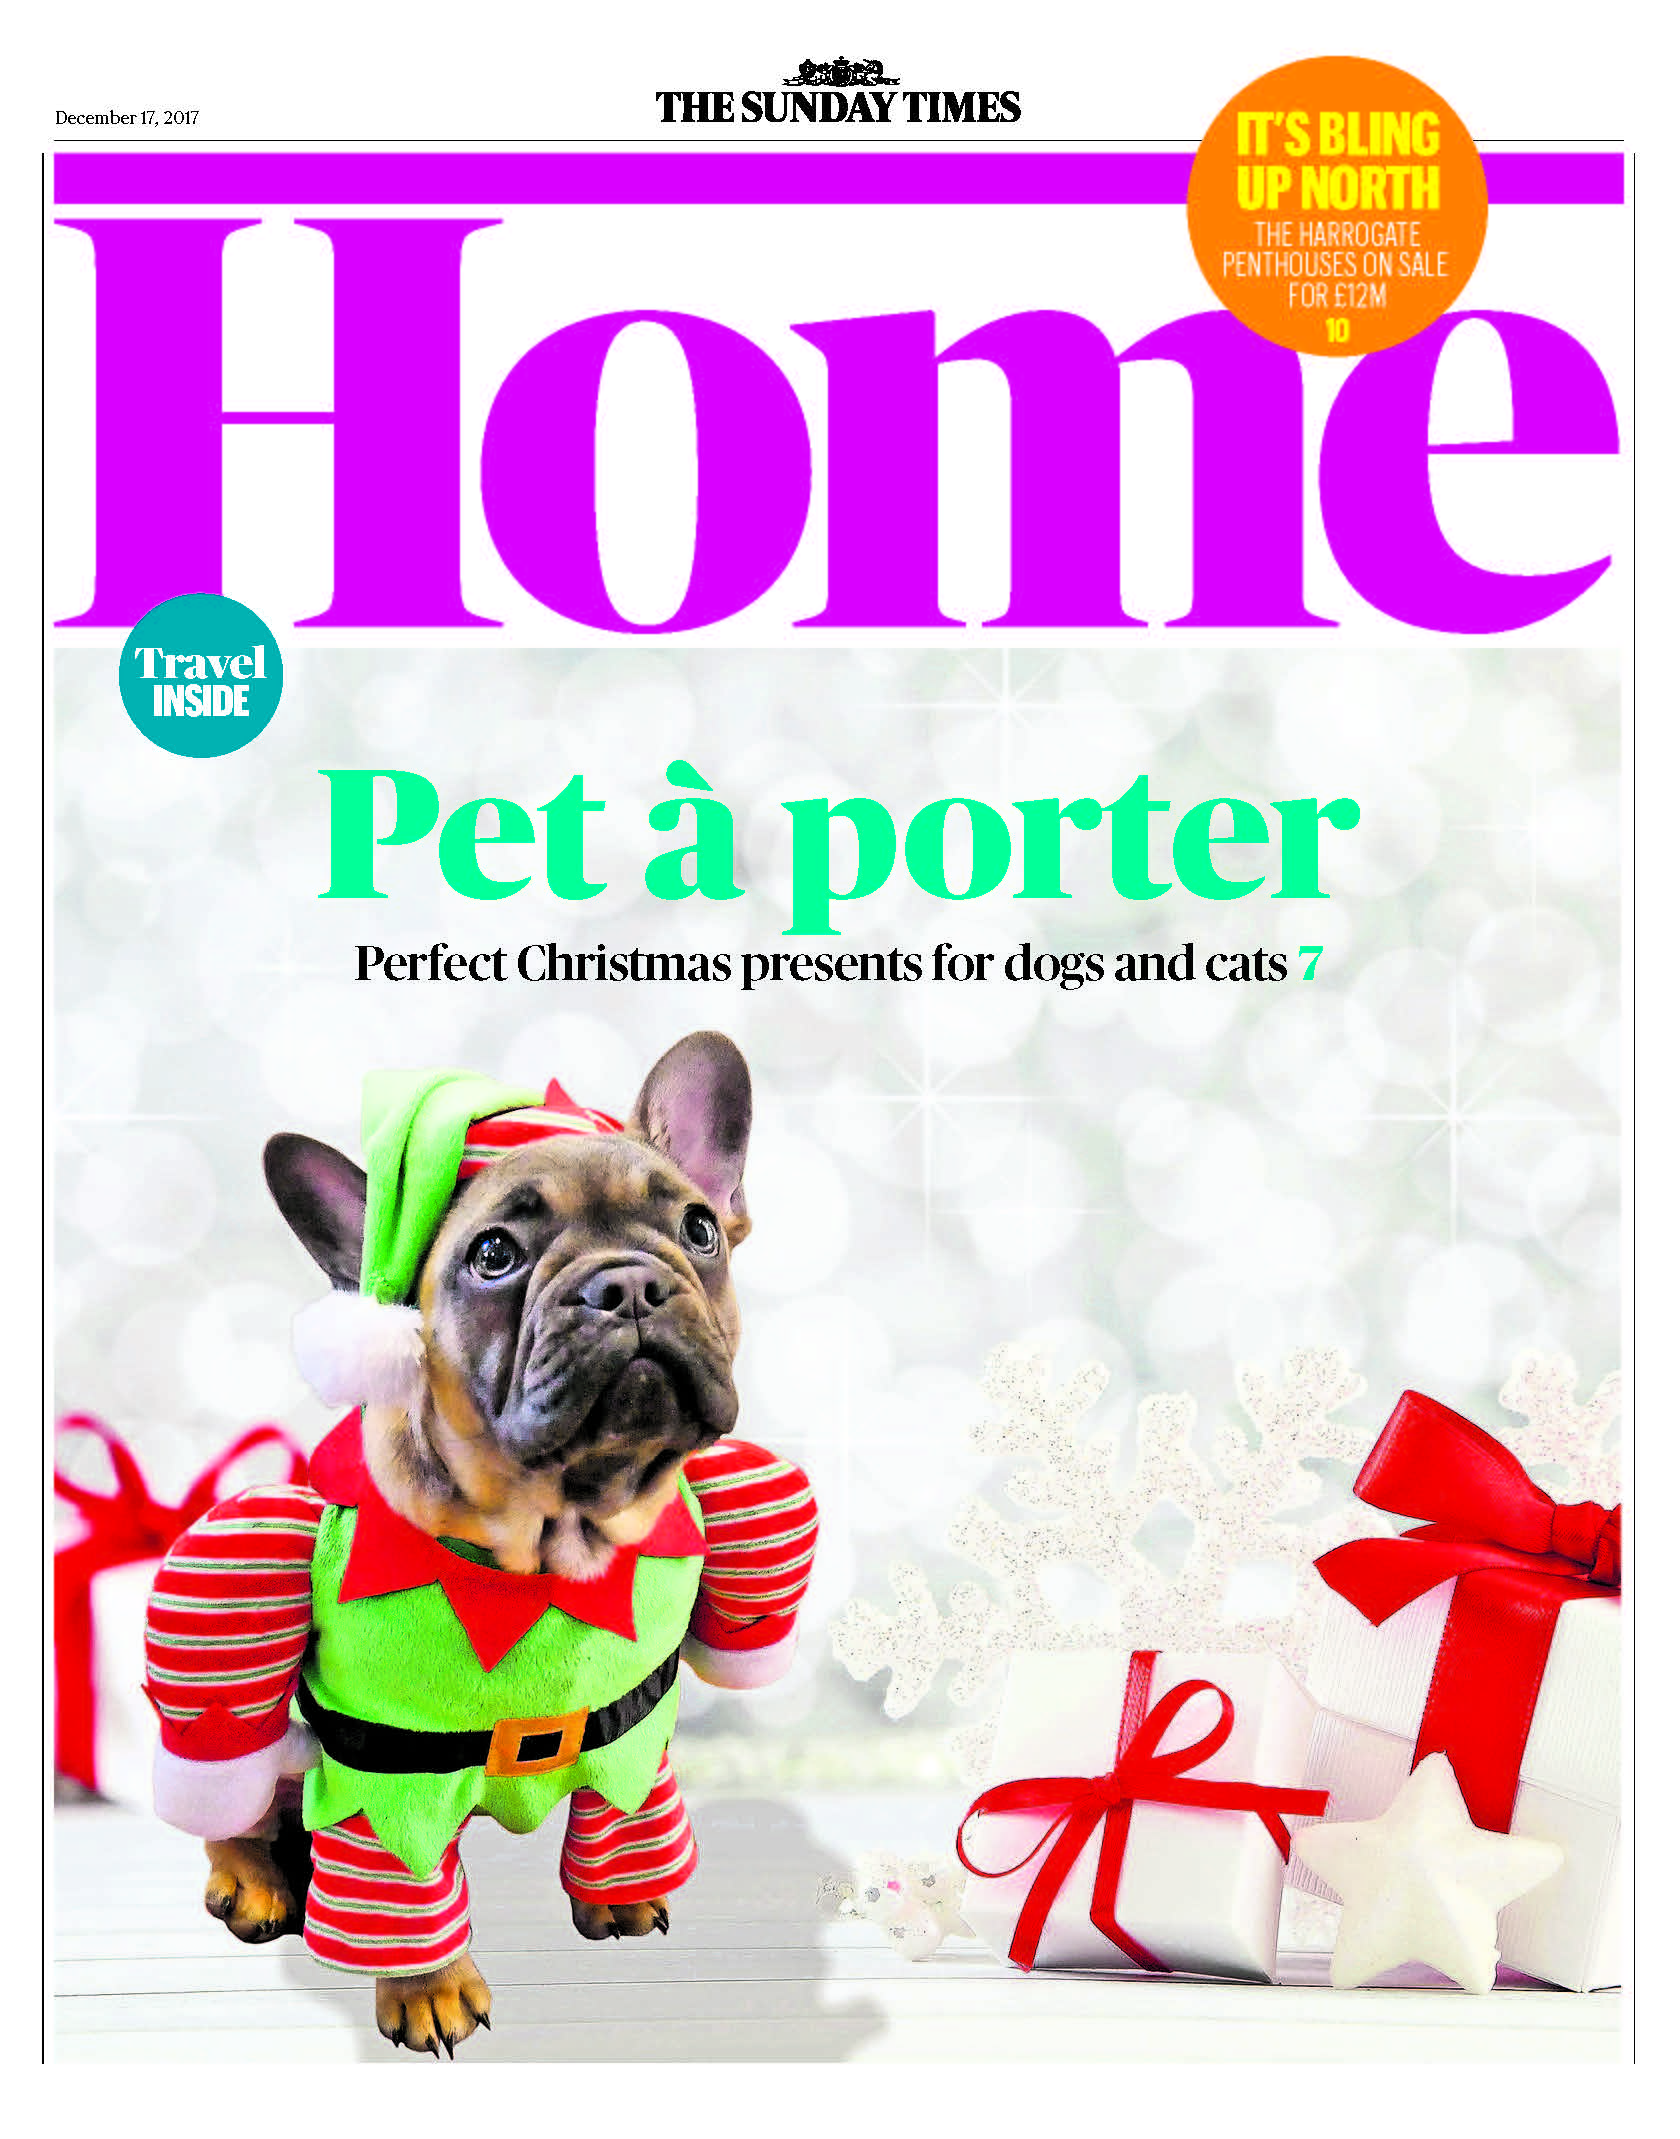 dog, dogs, style, magazine, press, editorial, home, sunday times